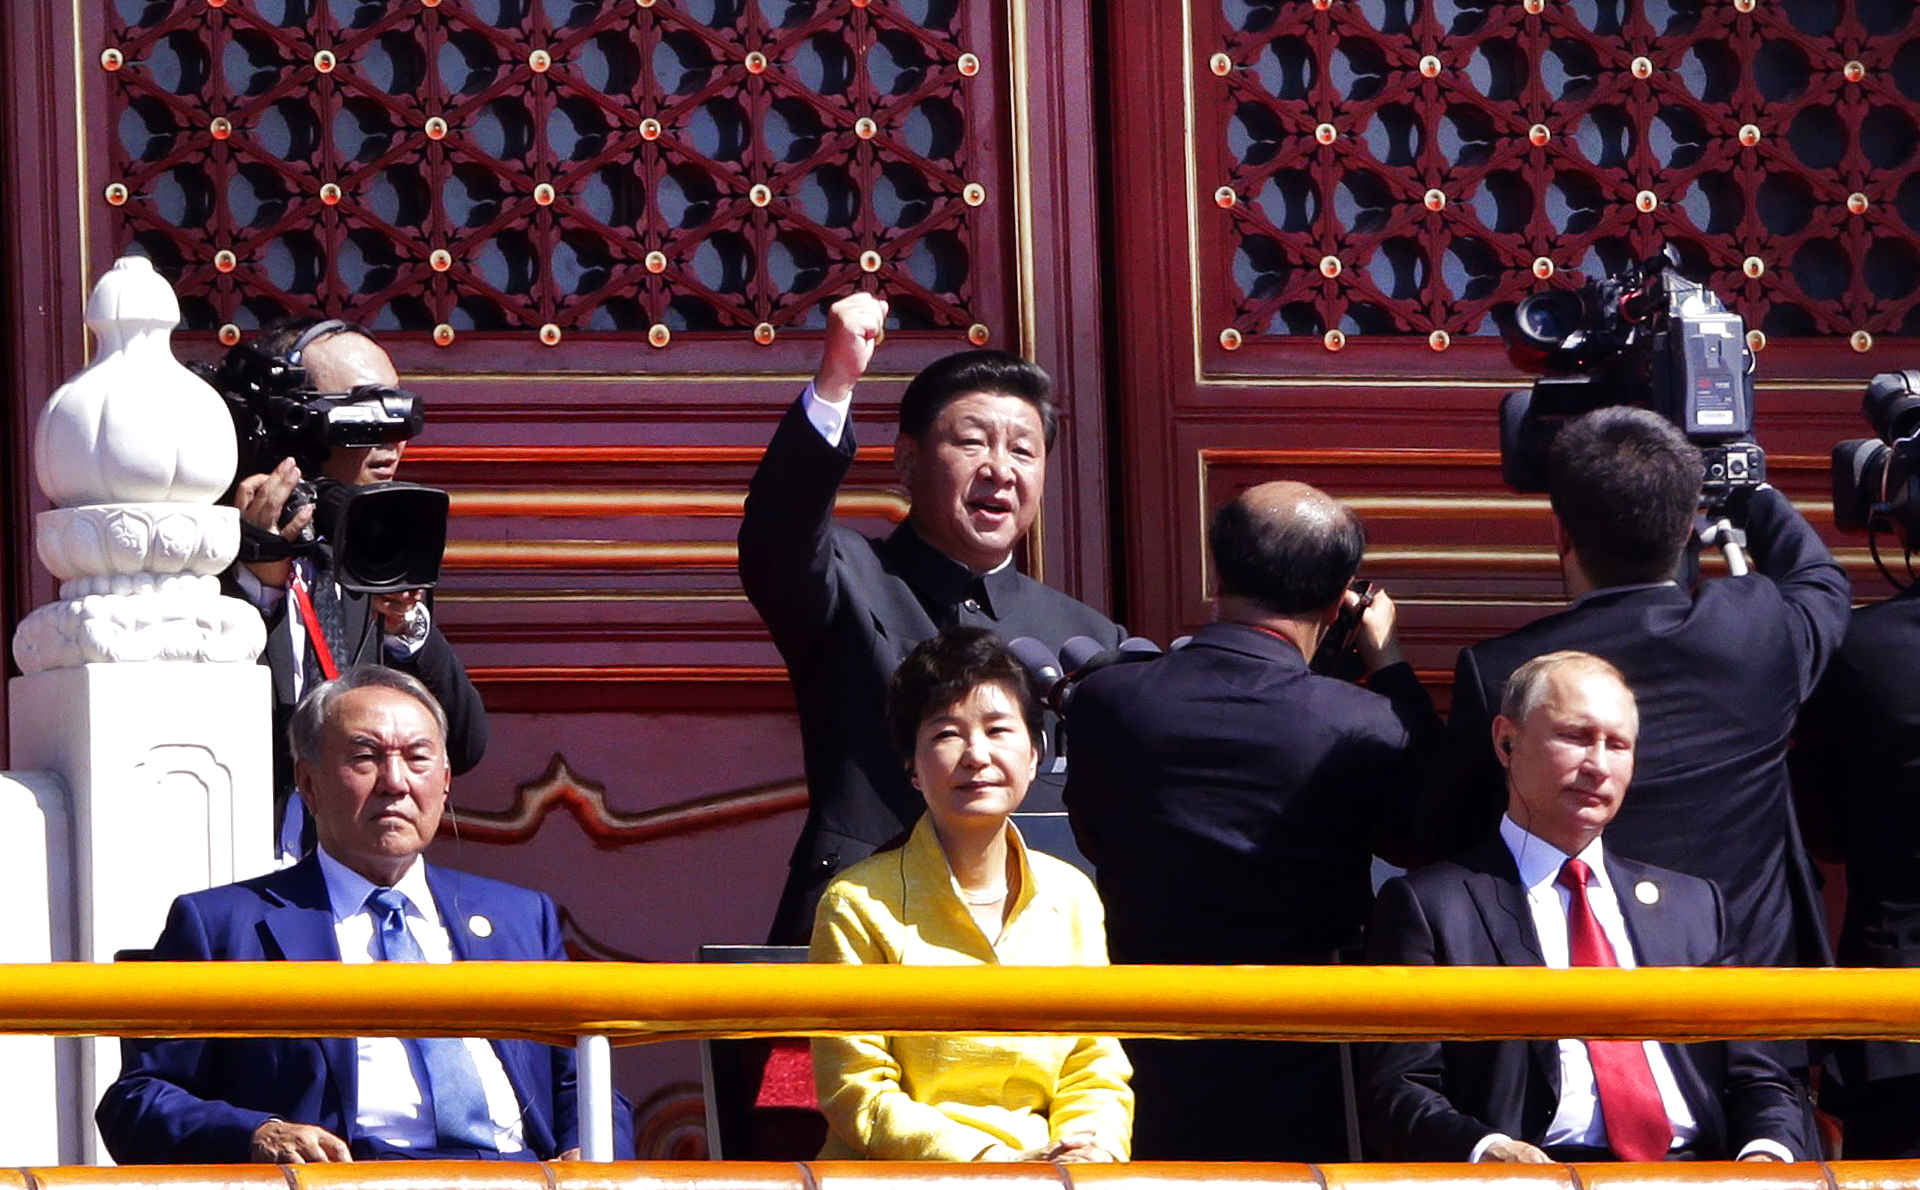 China's President Xi Jinping (centre at rear) gestures as he delivers a speech behind Russia's President Vladimir Putin (right), South Korea's President Park Geun-hye (centre) and Kazakhstan President Nursultan Nazarbayev (left)  during a military parade at Tiananmen Square in Beijing to mark the 70th anniversary of victory over Japan and the end of World War II. Photo: AFP